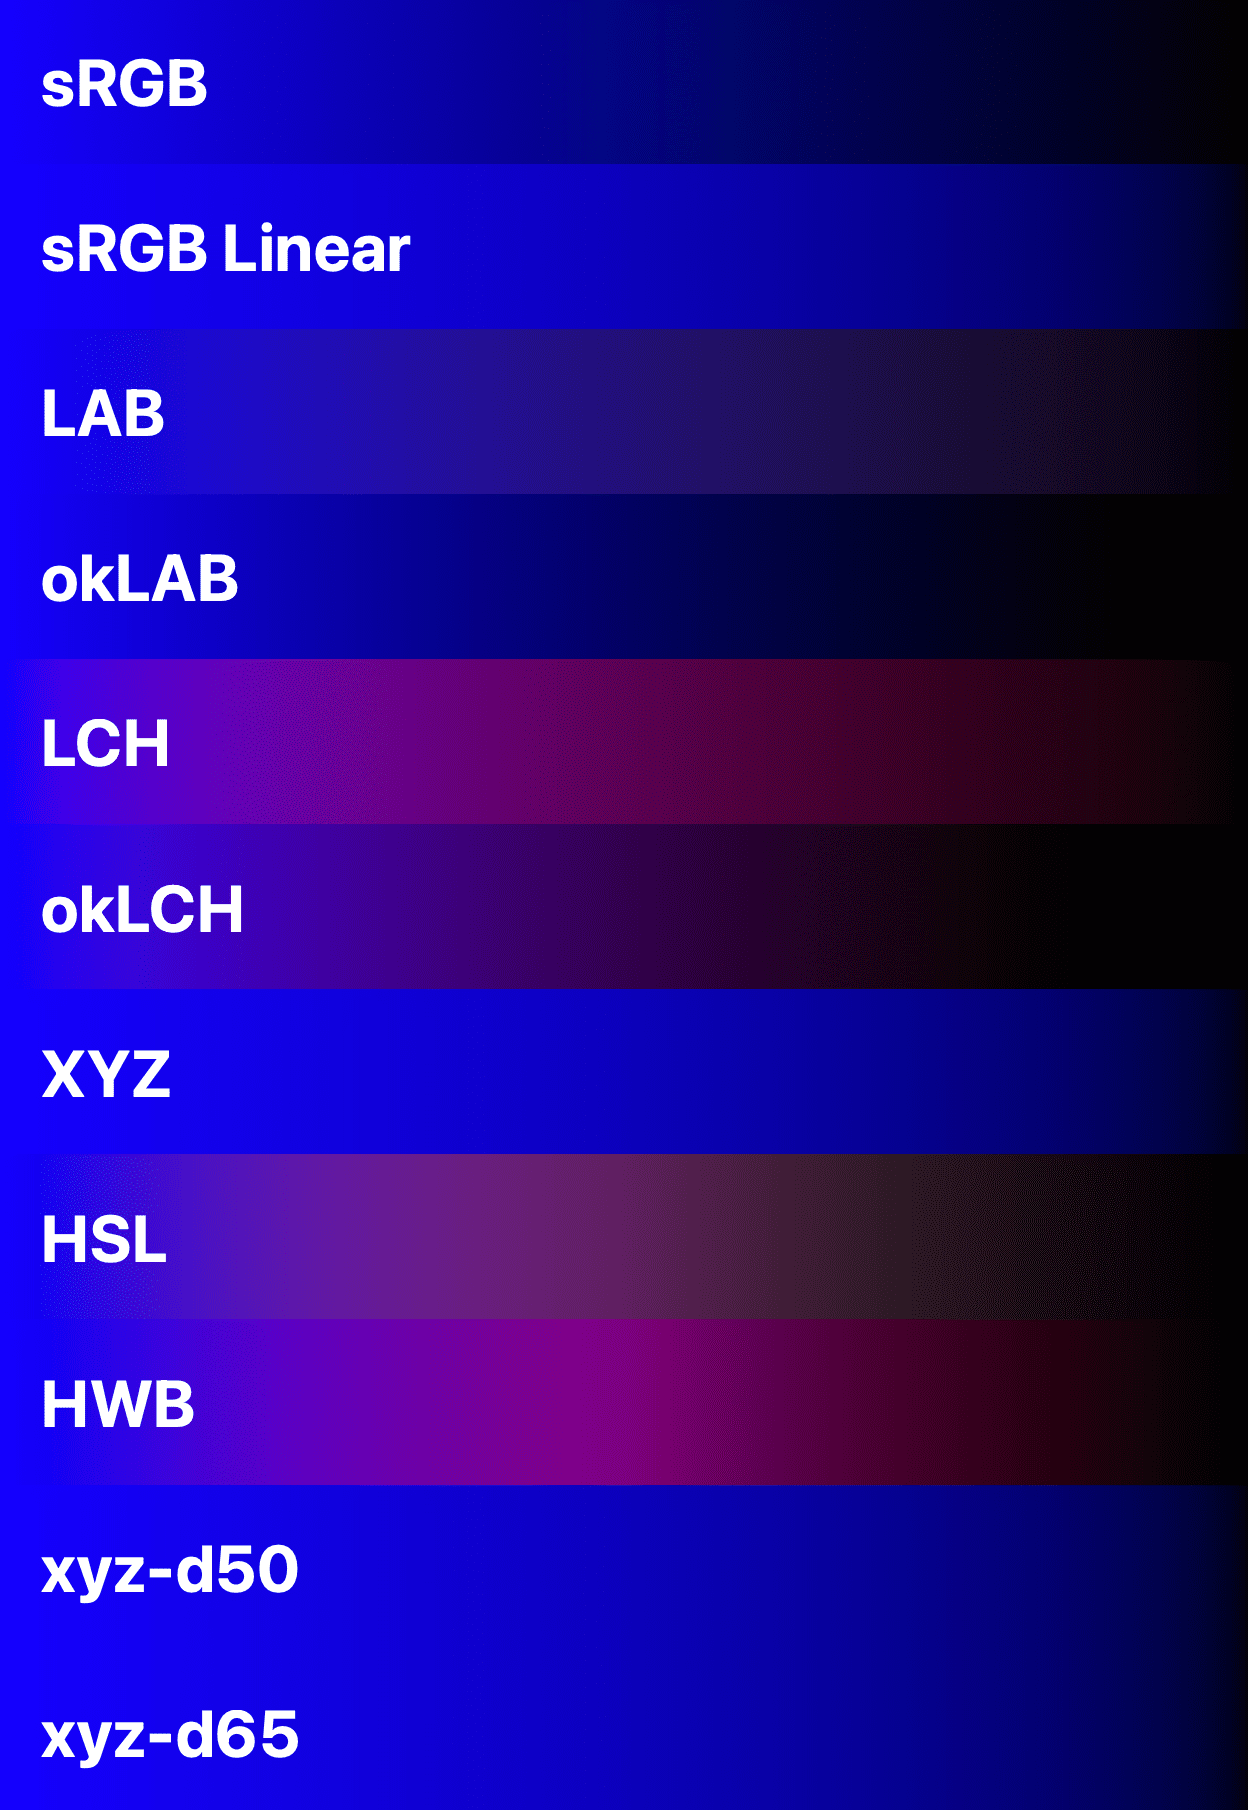 11 color spaces shown comparing blue to black.